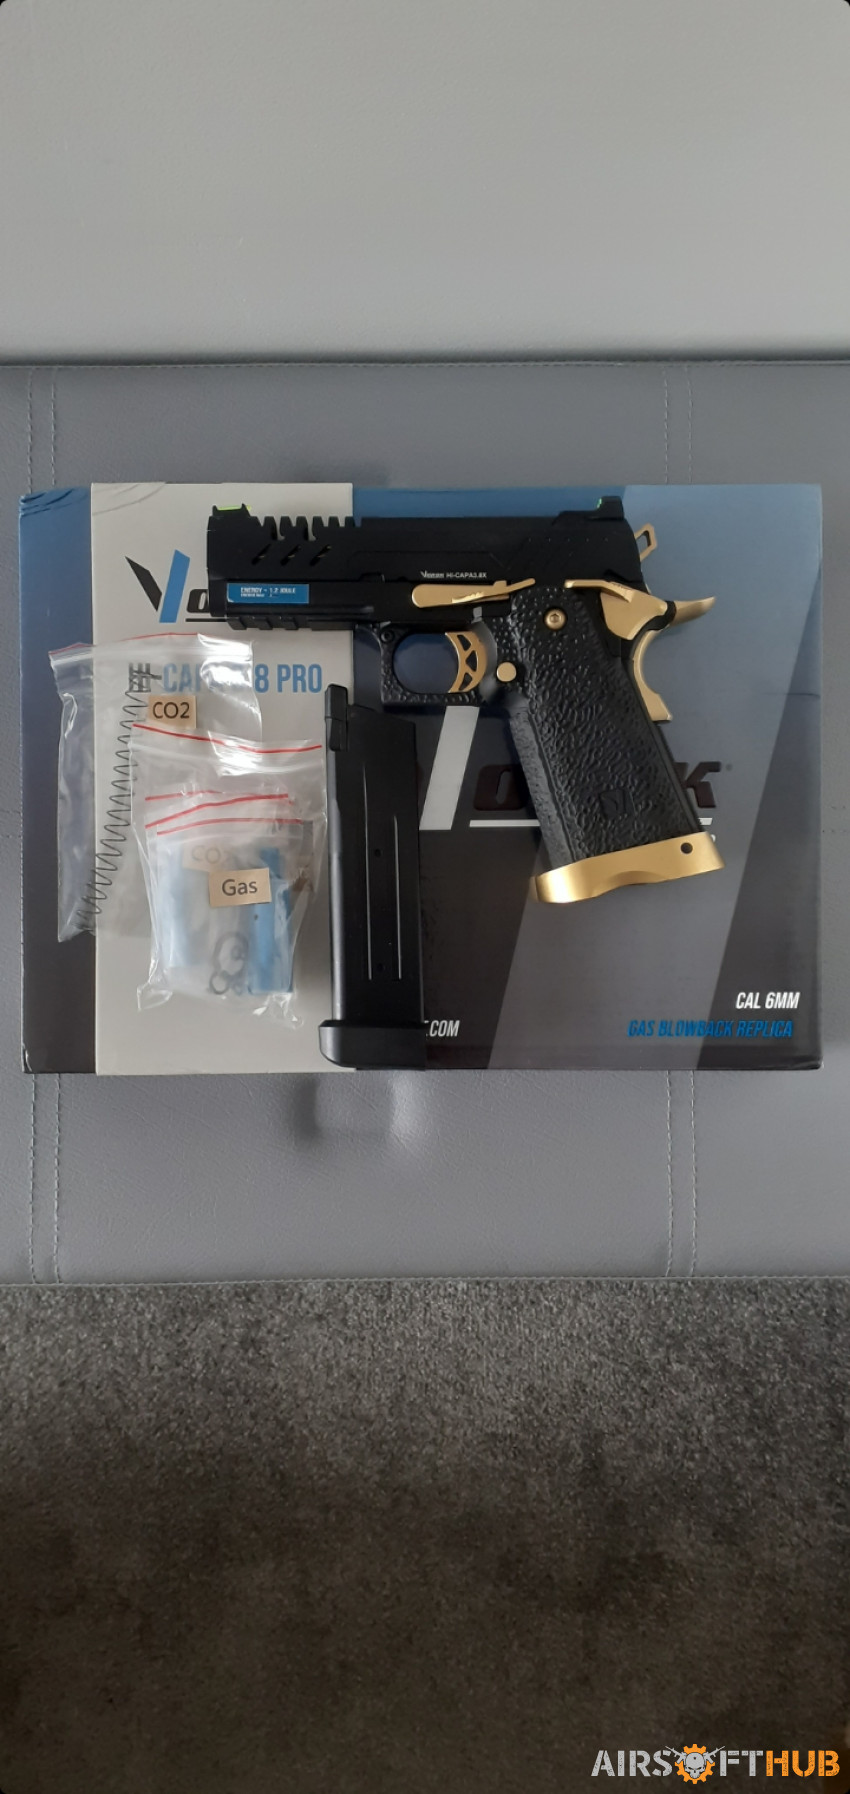 Vorsk 3.8 Pro Gold Hi-Capa GBB - Used airsoft equipment